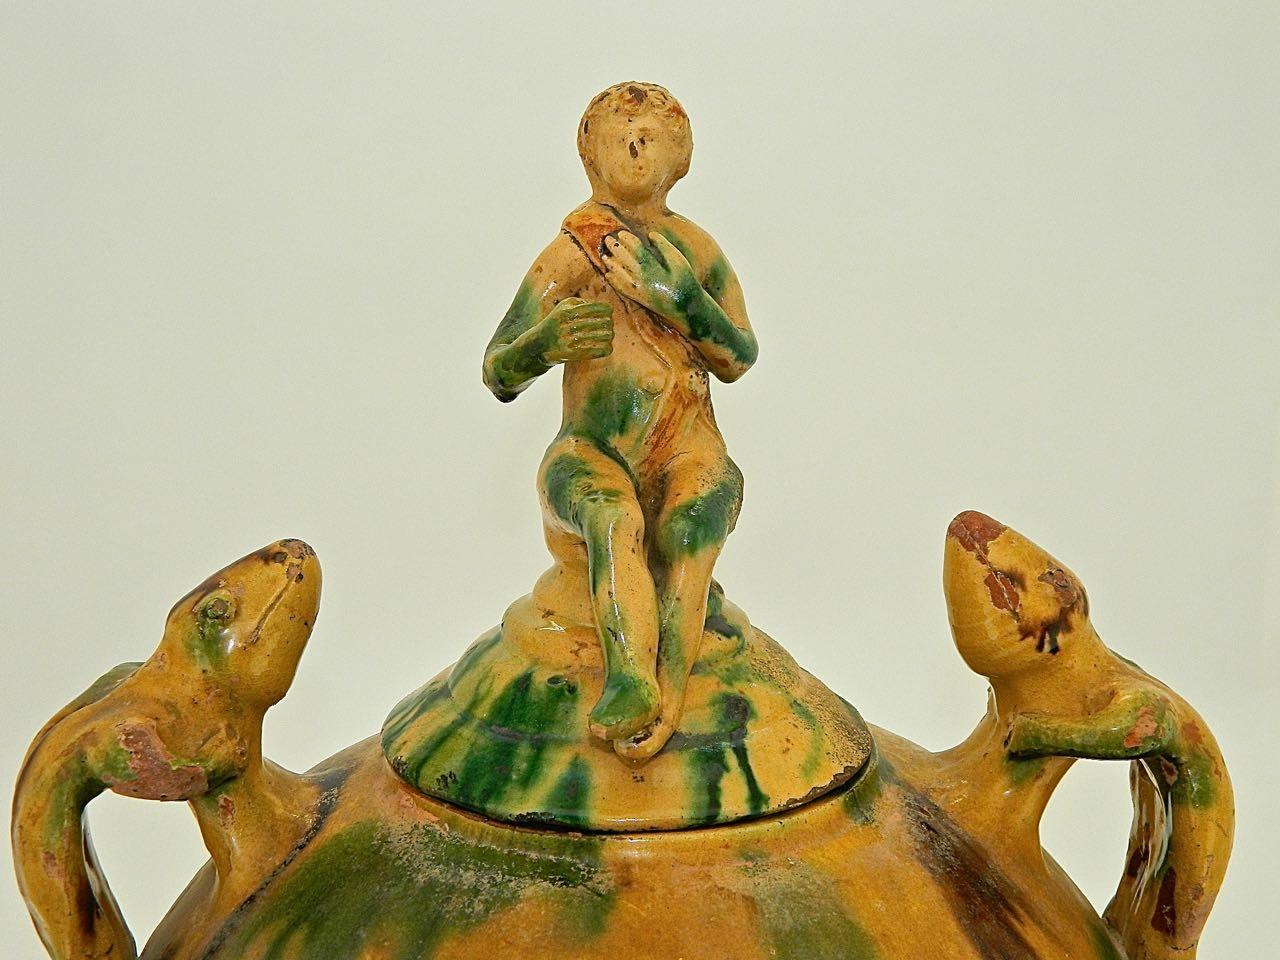 This whimsical late 19th century glazed large-mouth Majolica urn features two near life-size salamanders as handles, crowned by a delicately proportioned conical top with a seated figure.

Found in the town of Perelada in the province of Girona,